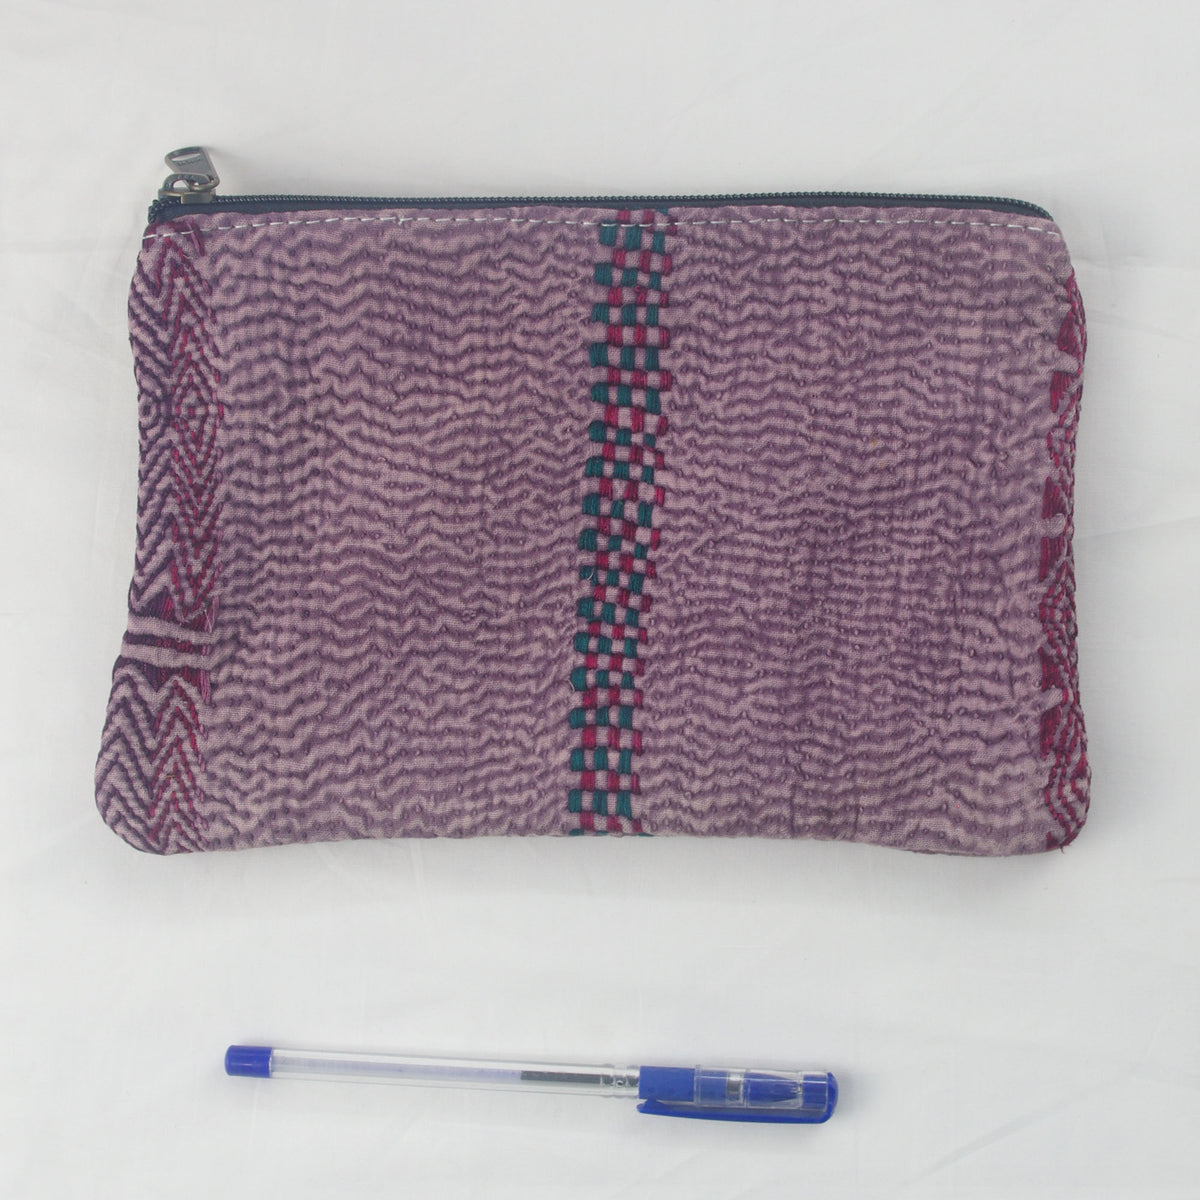 Vintage Kantha Pouch, Cosmetic Bag - Purple Zig-Zag